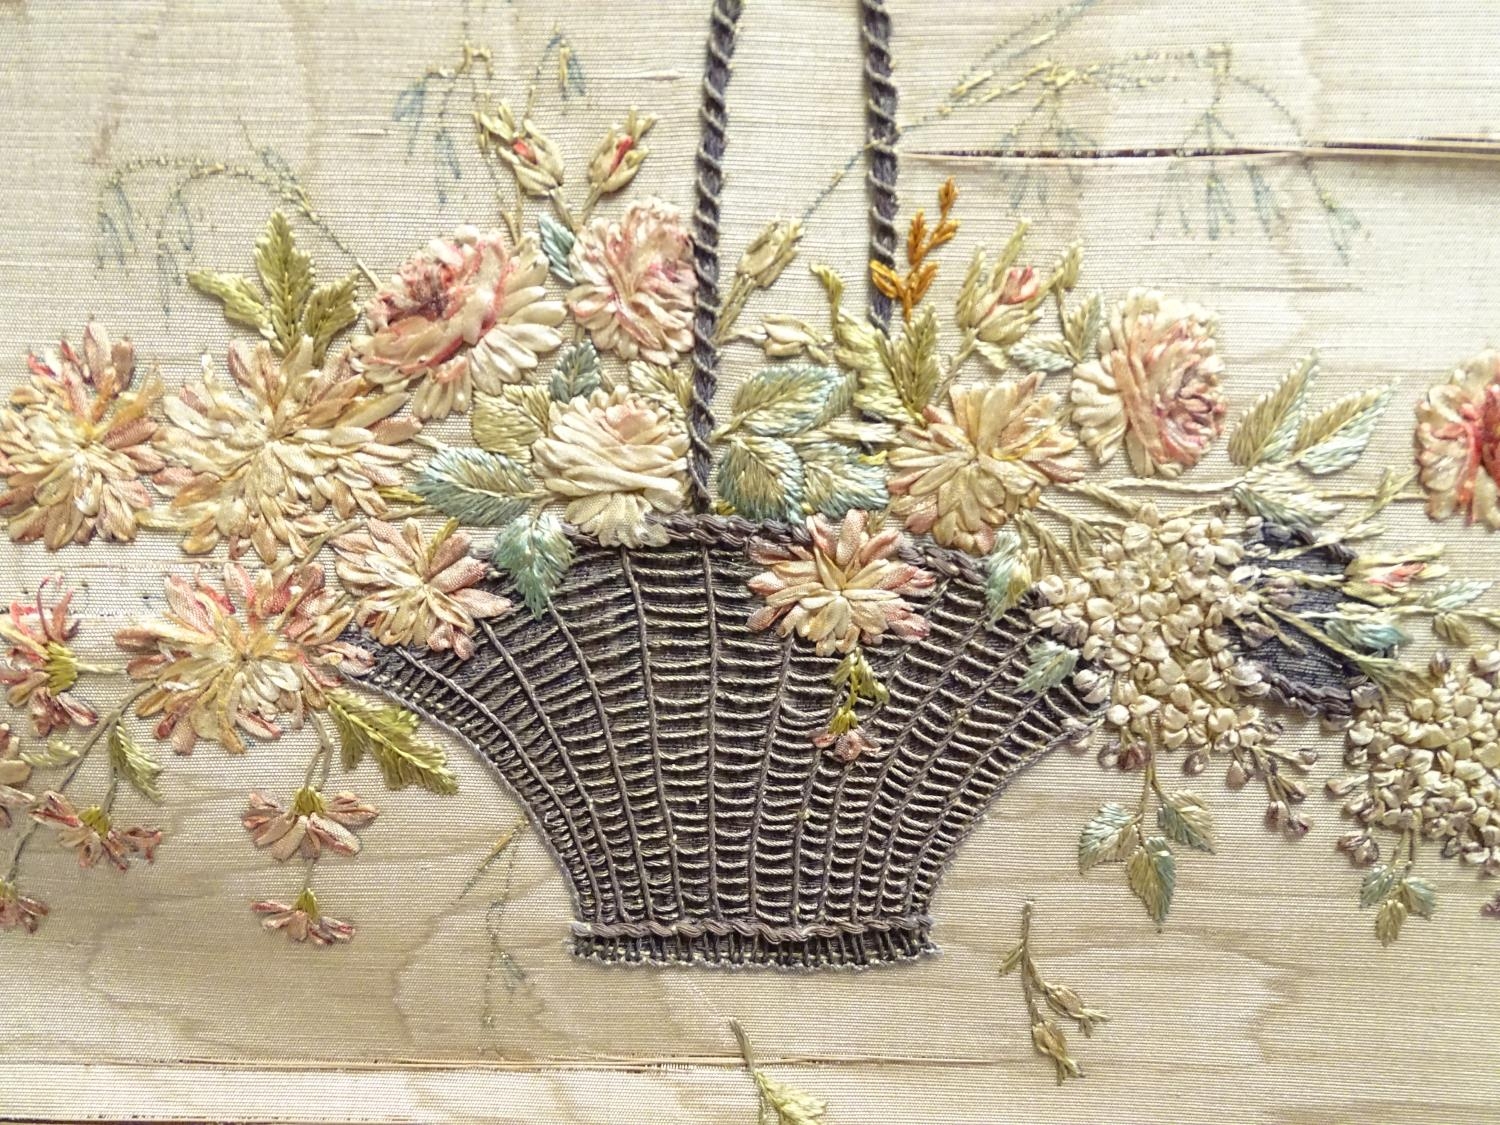 An early 19thC silk needlework with fine floral decoration, bows, swags and a woven basket in a - Image 10 of 10